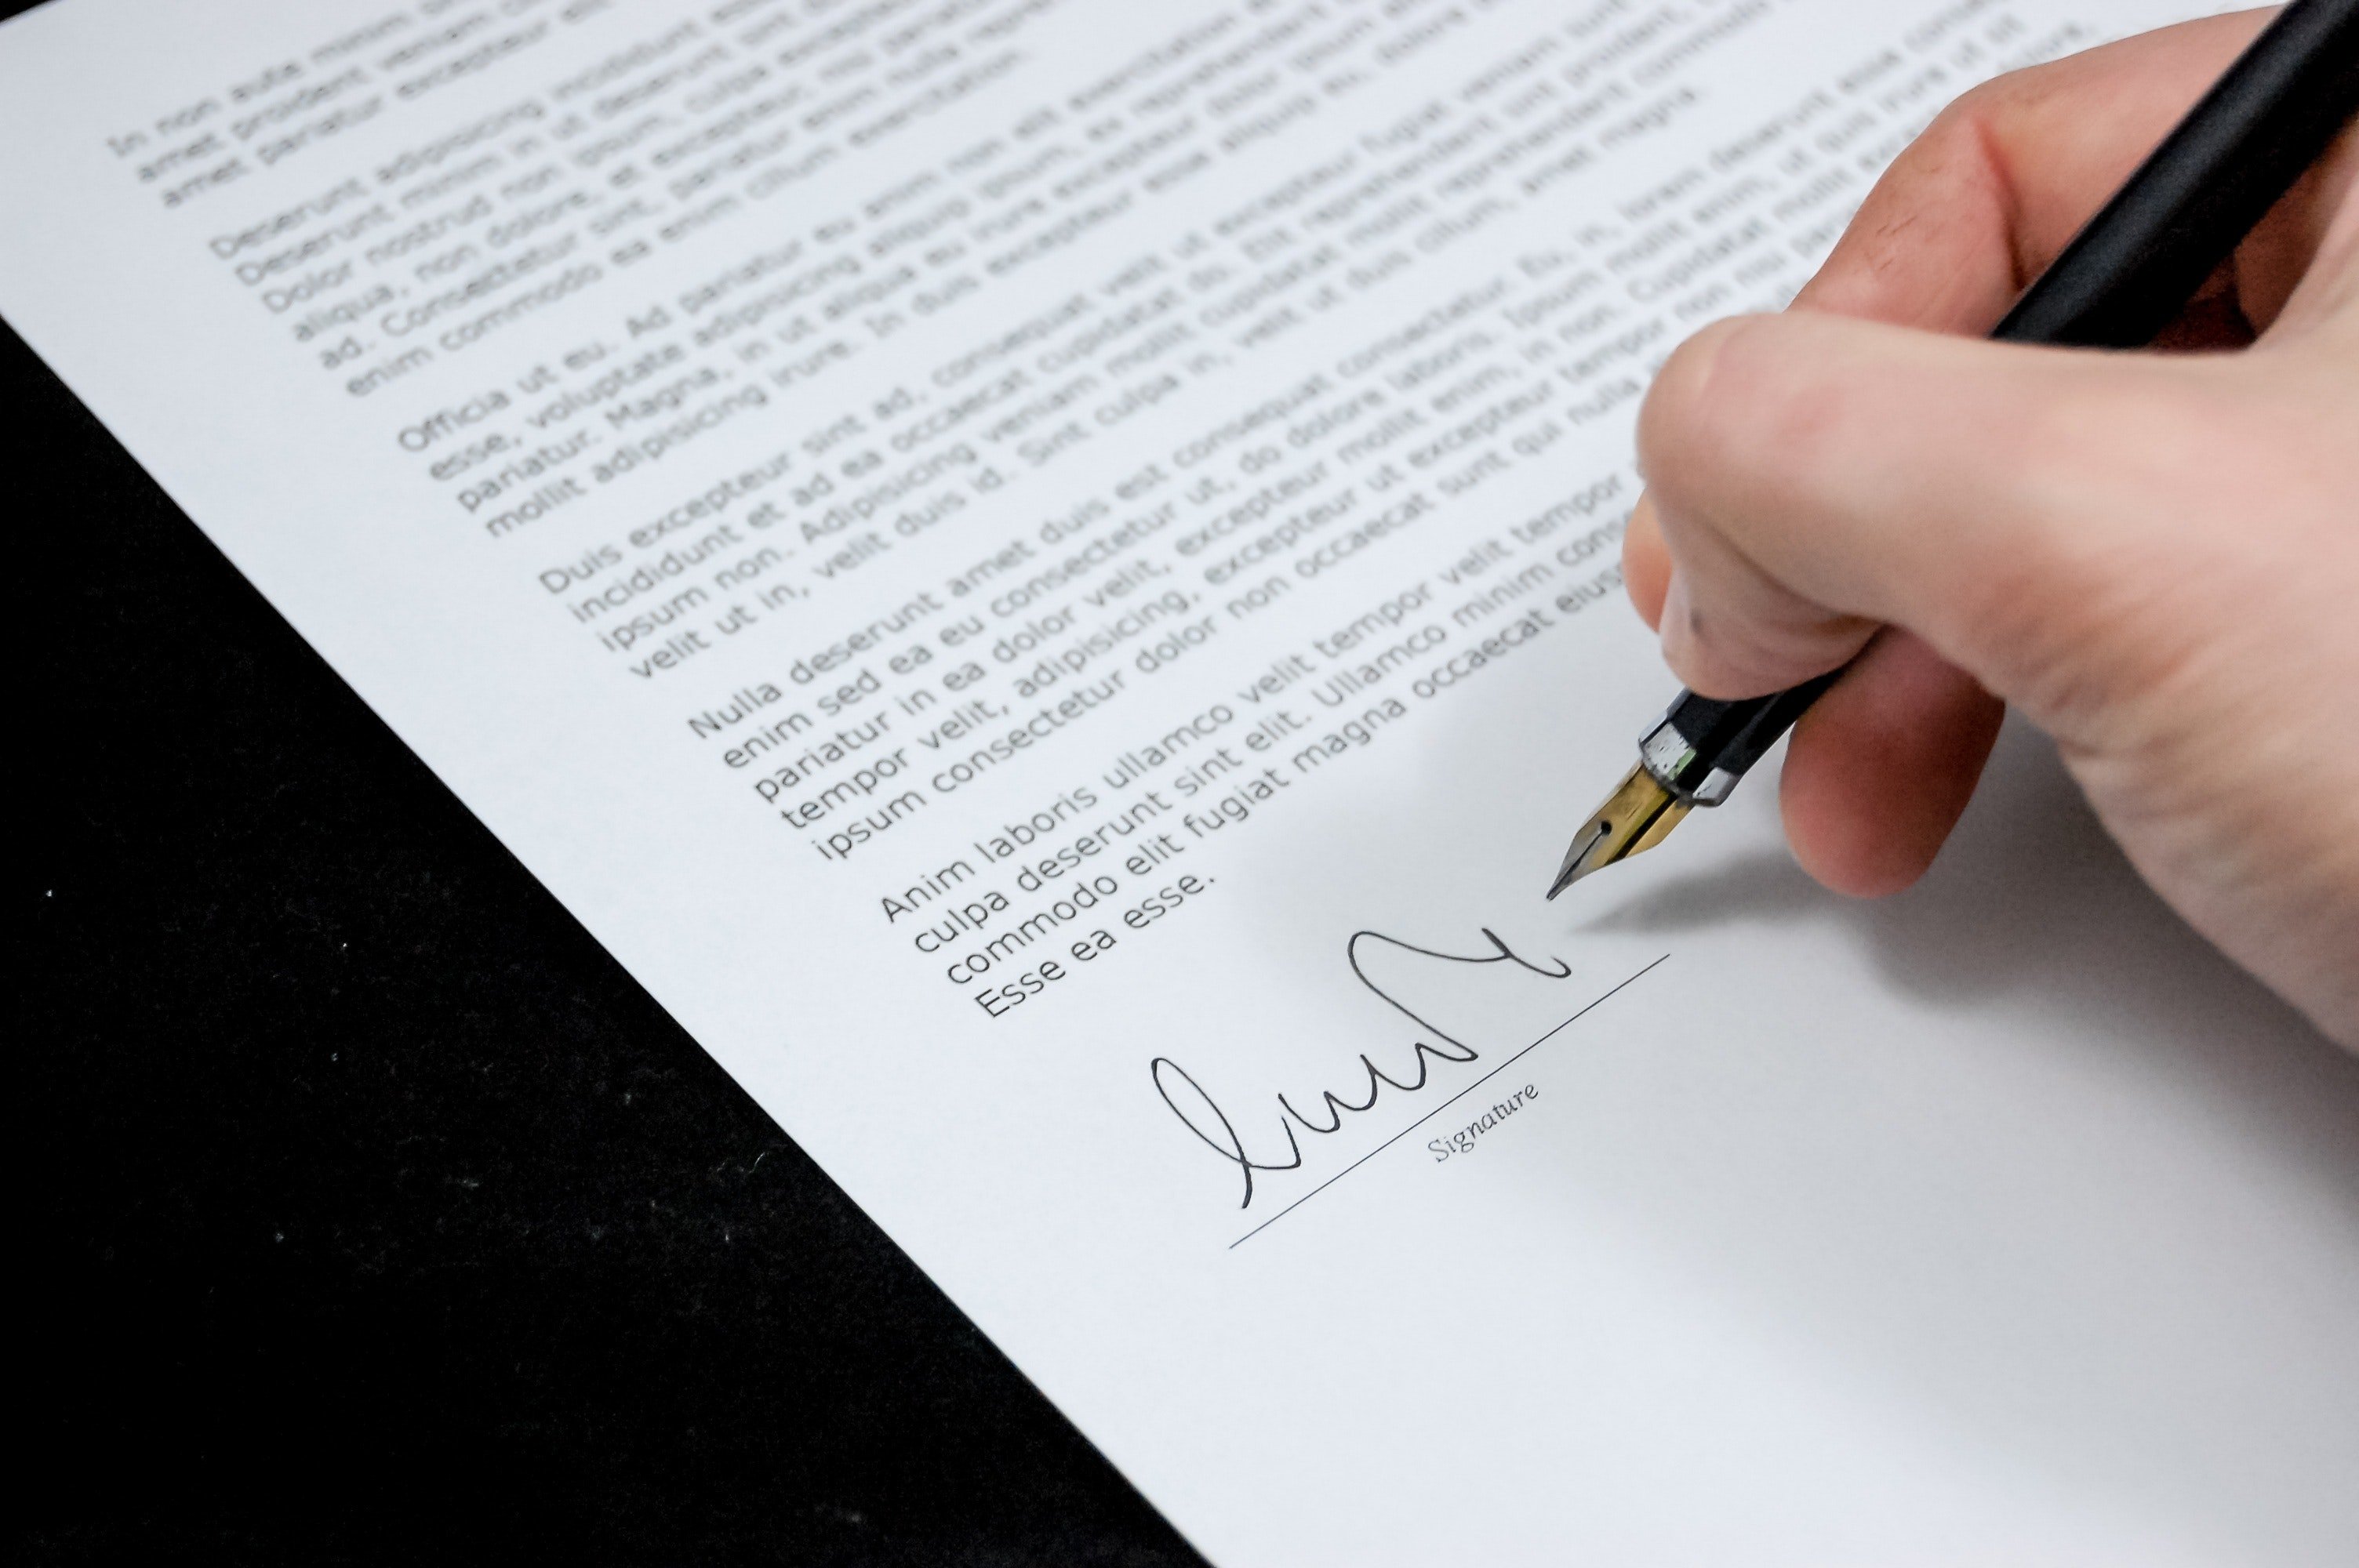 Pictured: A photograph of an individual signing a business document | Source: Pexels  